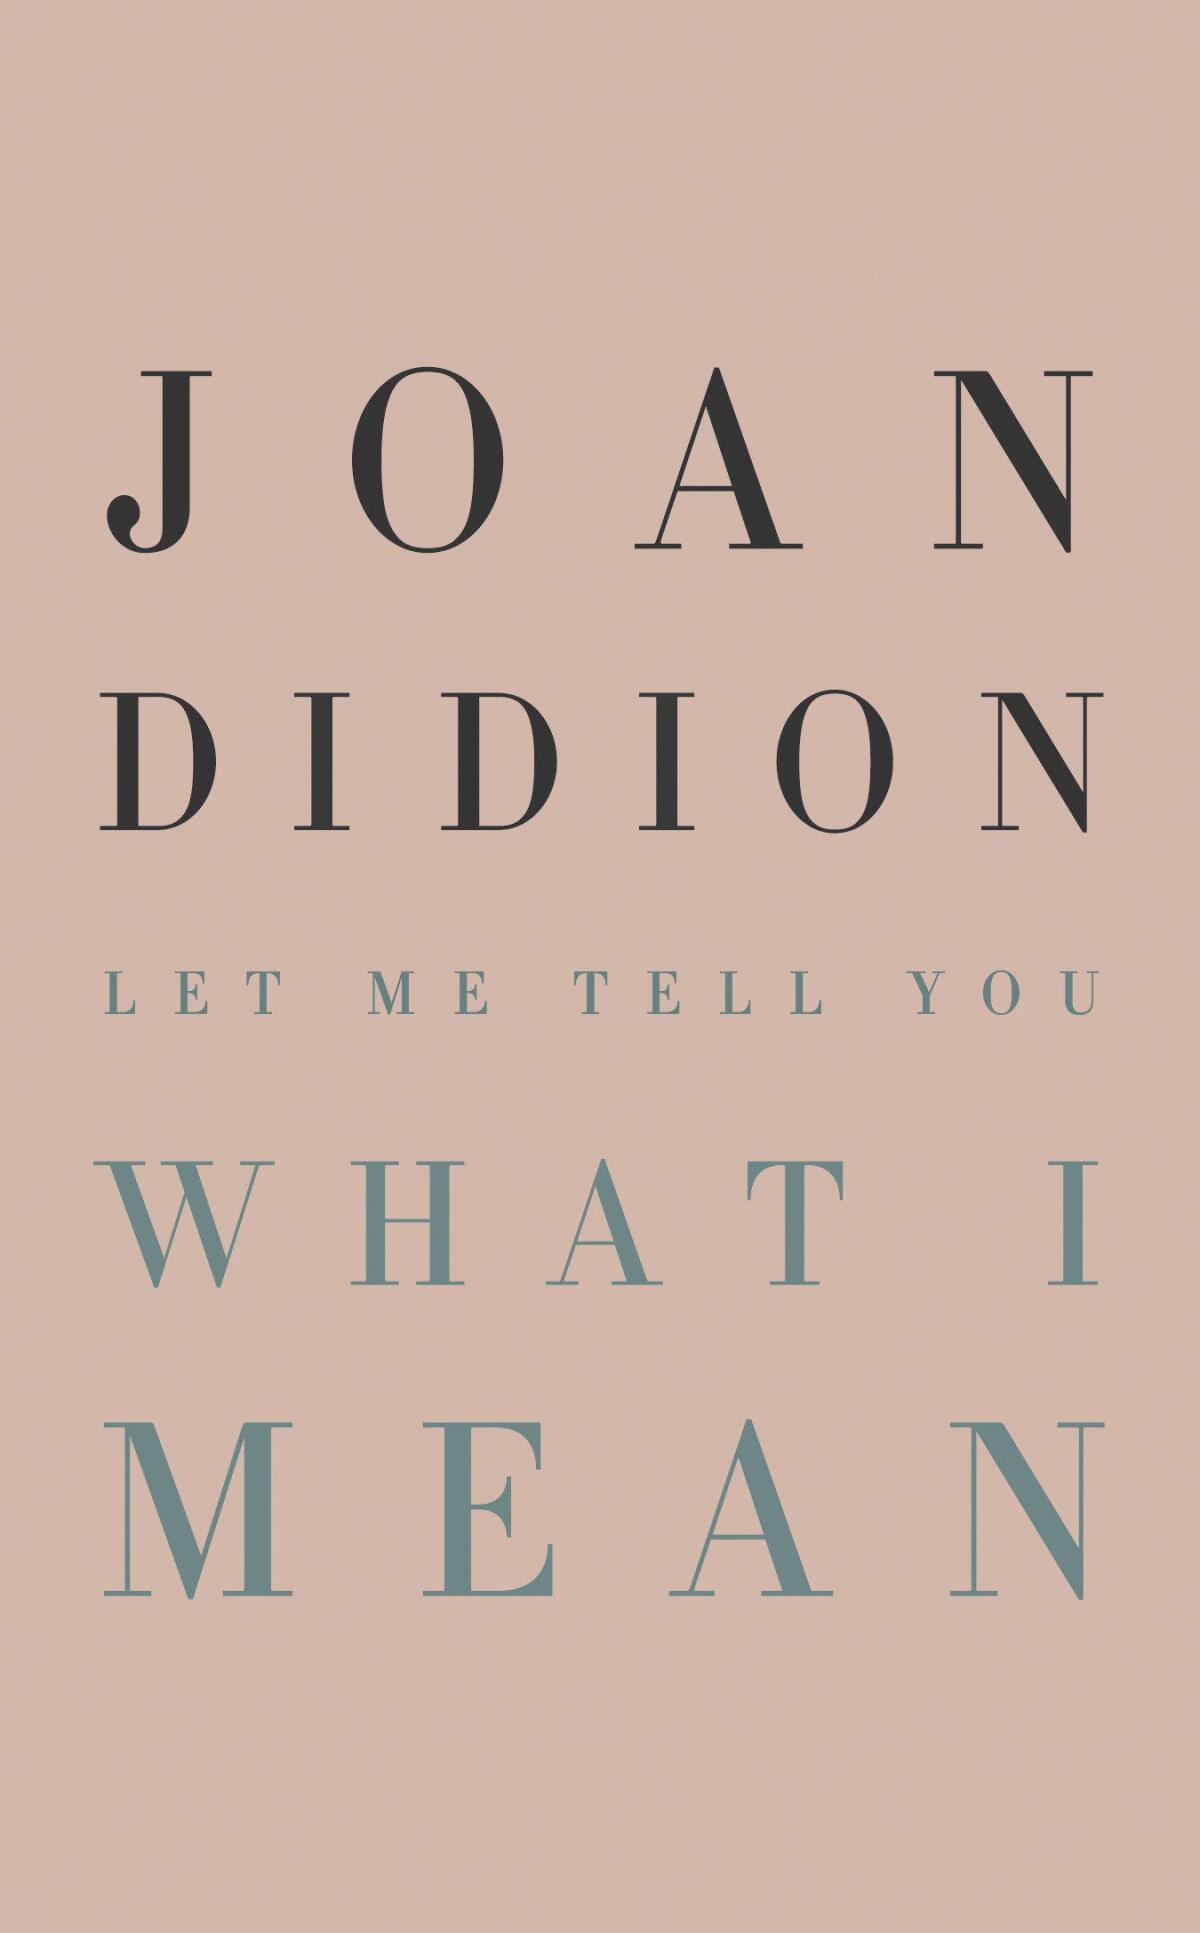 Joan Didion's "Let Me Tell You What I Mean"